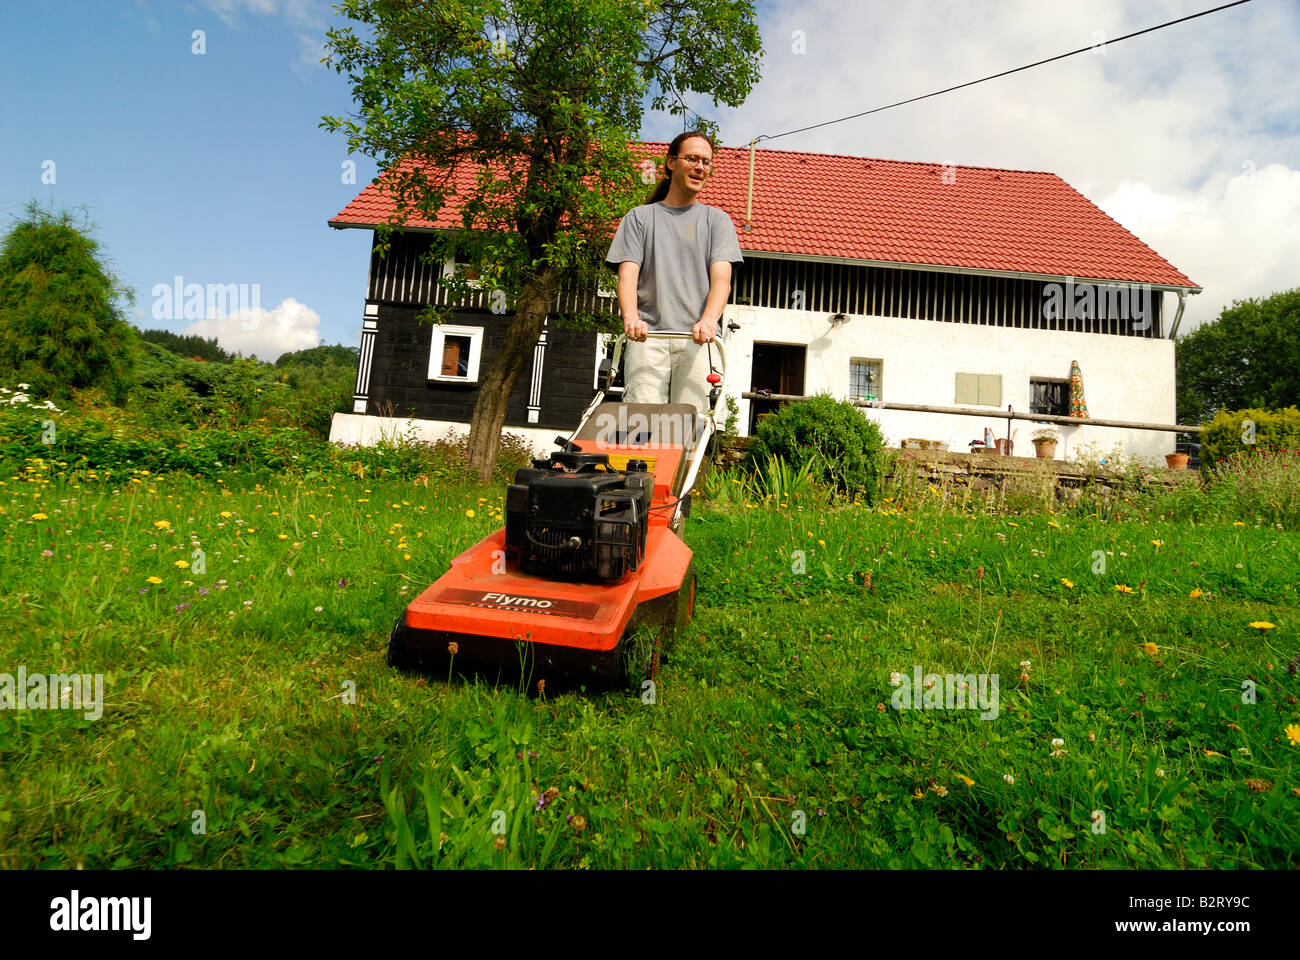 man father while mowing the lawn green grass garden Stock Photo